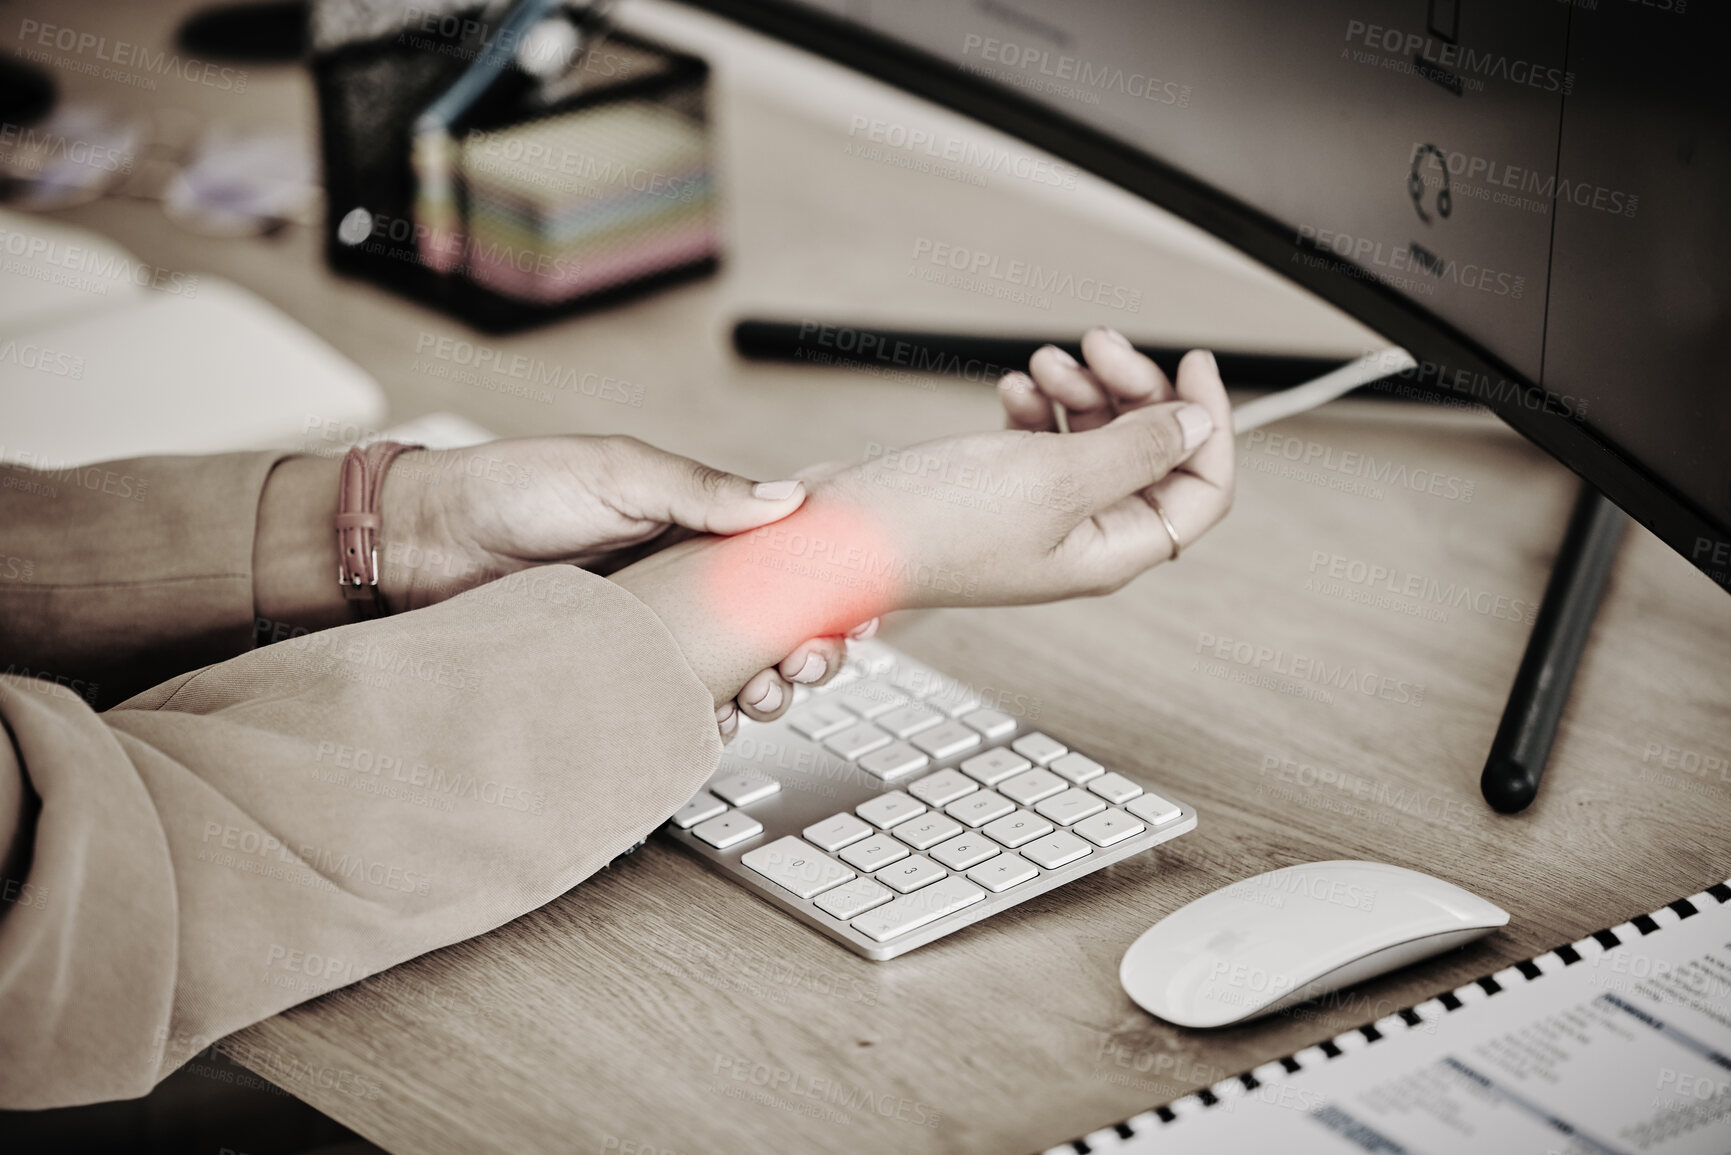 Buy stock photo Hands, business person and red wrist pain at computer for osteoporosis, orthopedic injury and health risk. Closeup of worker, carpal tunnel and glow of muscle problem in stress, fibromyalgia or sepia